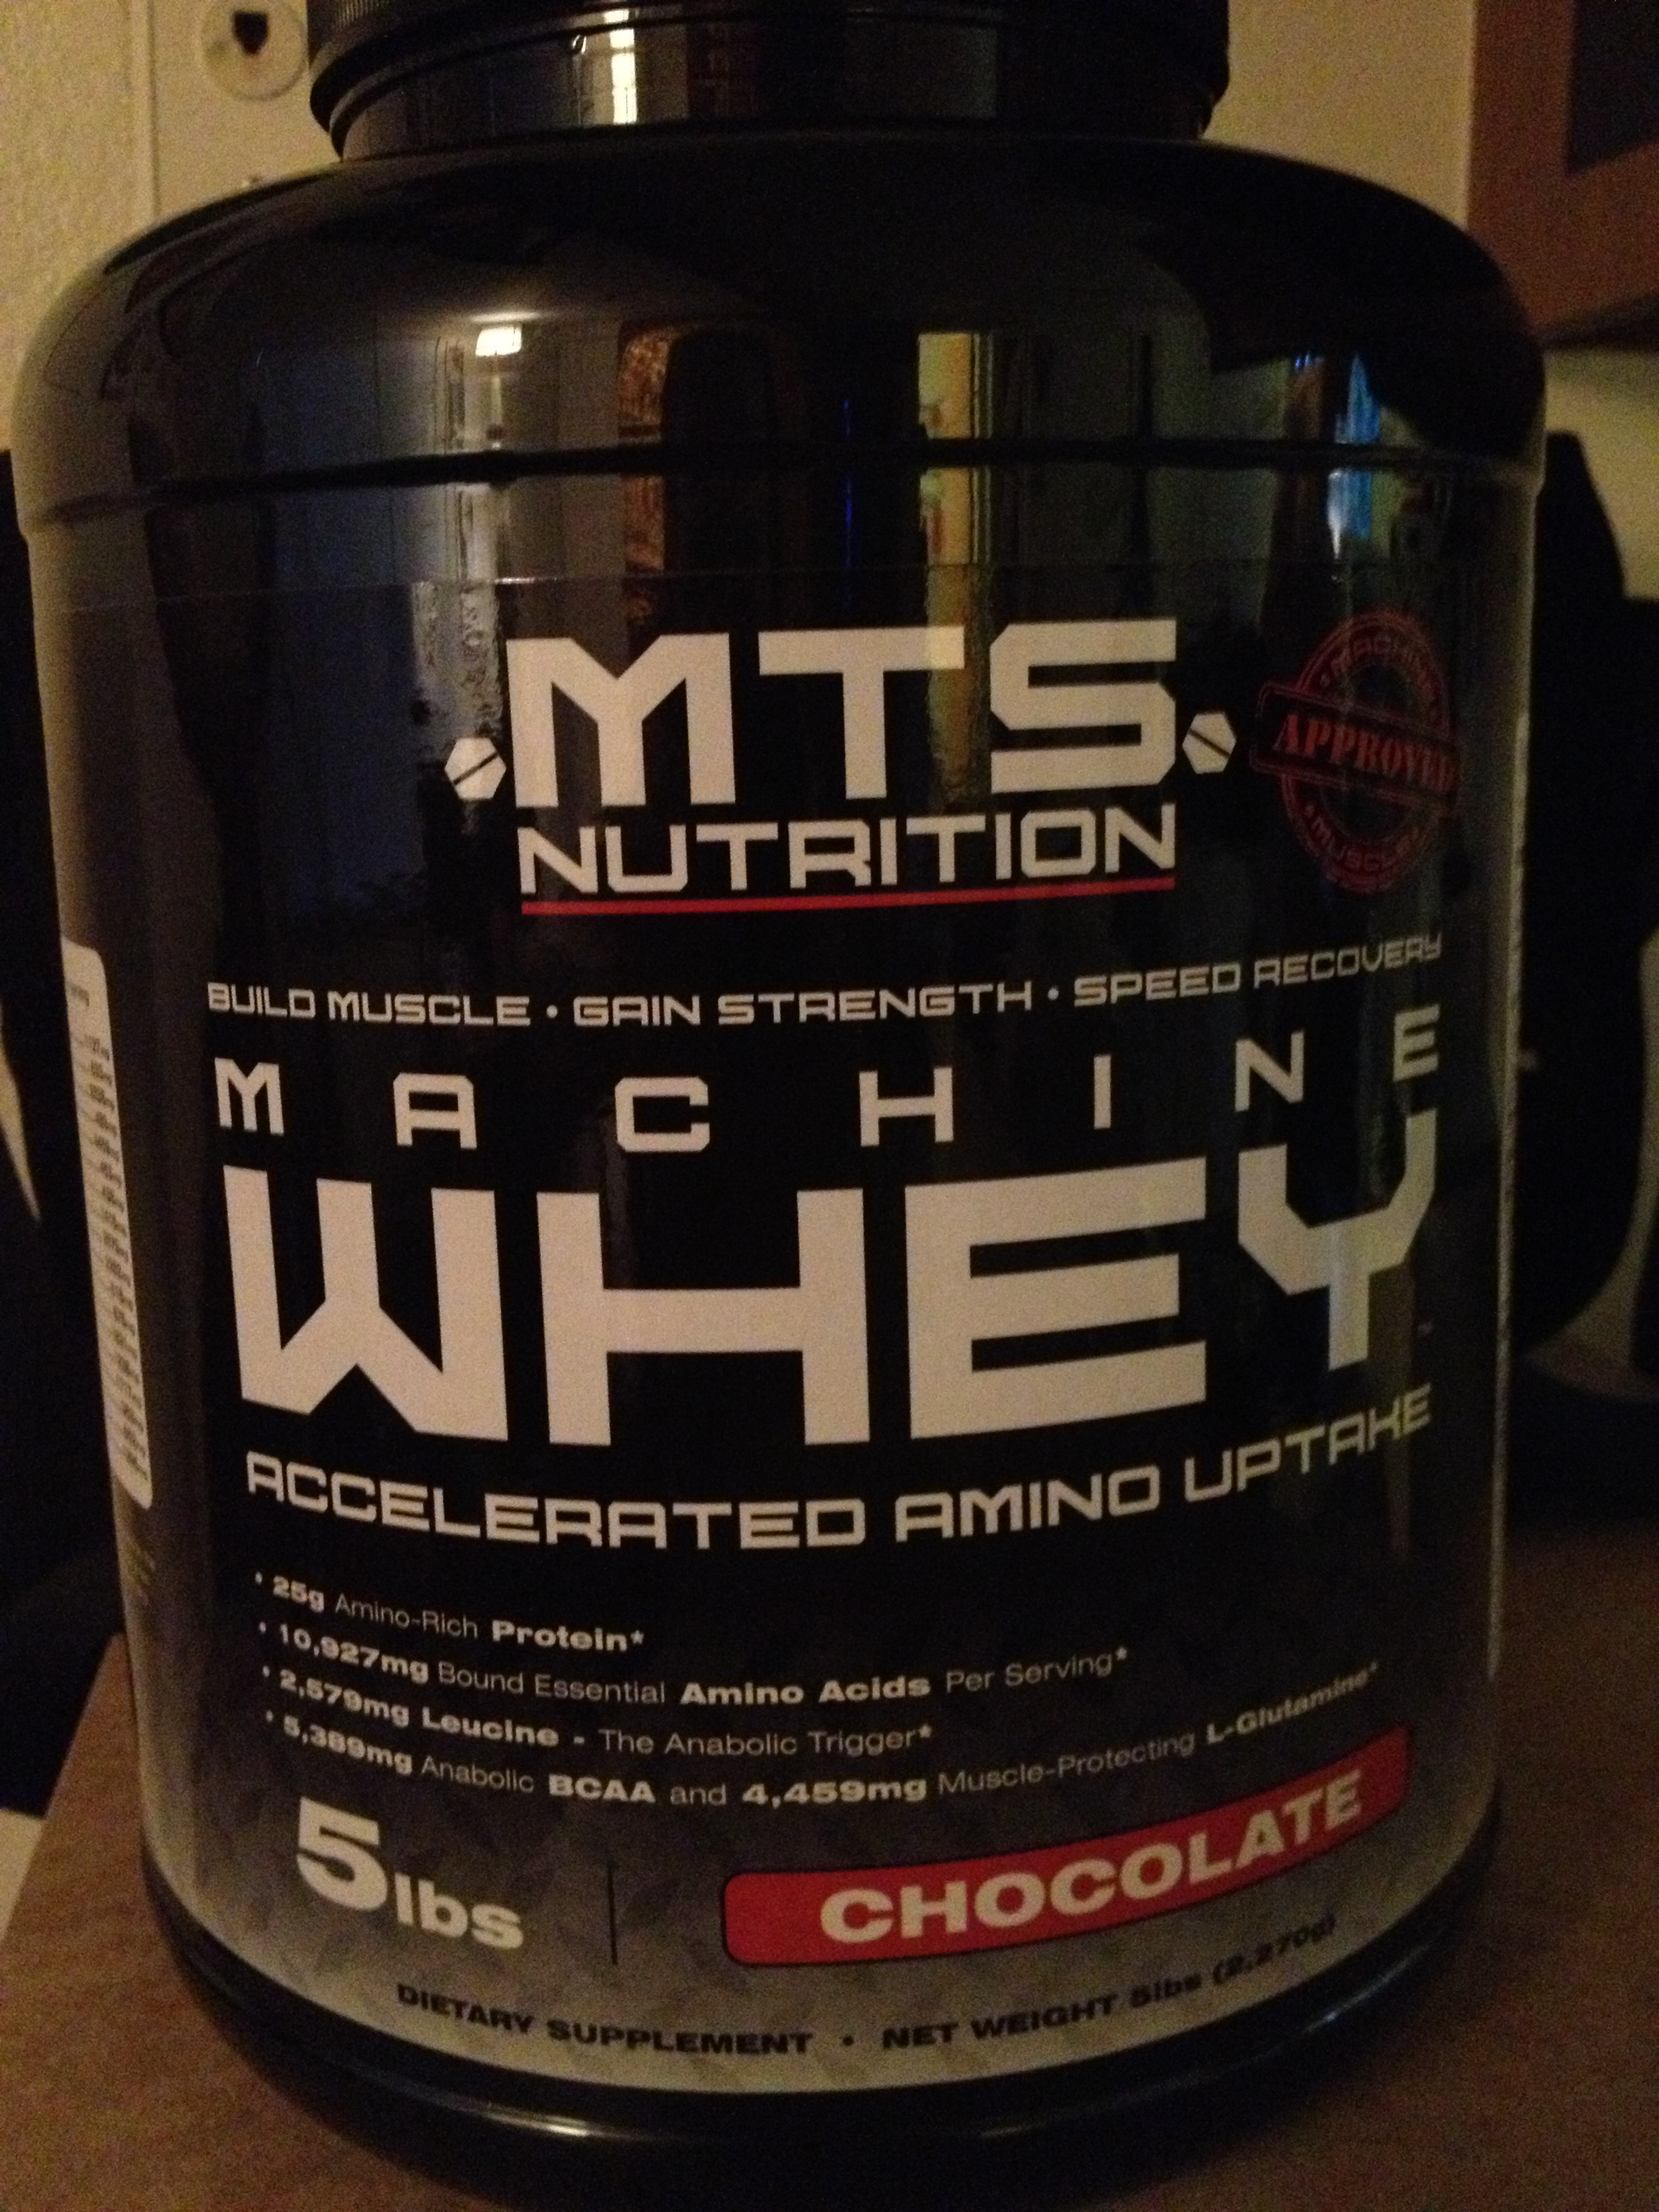 The protein I'm using 